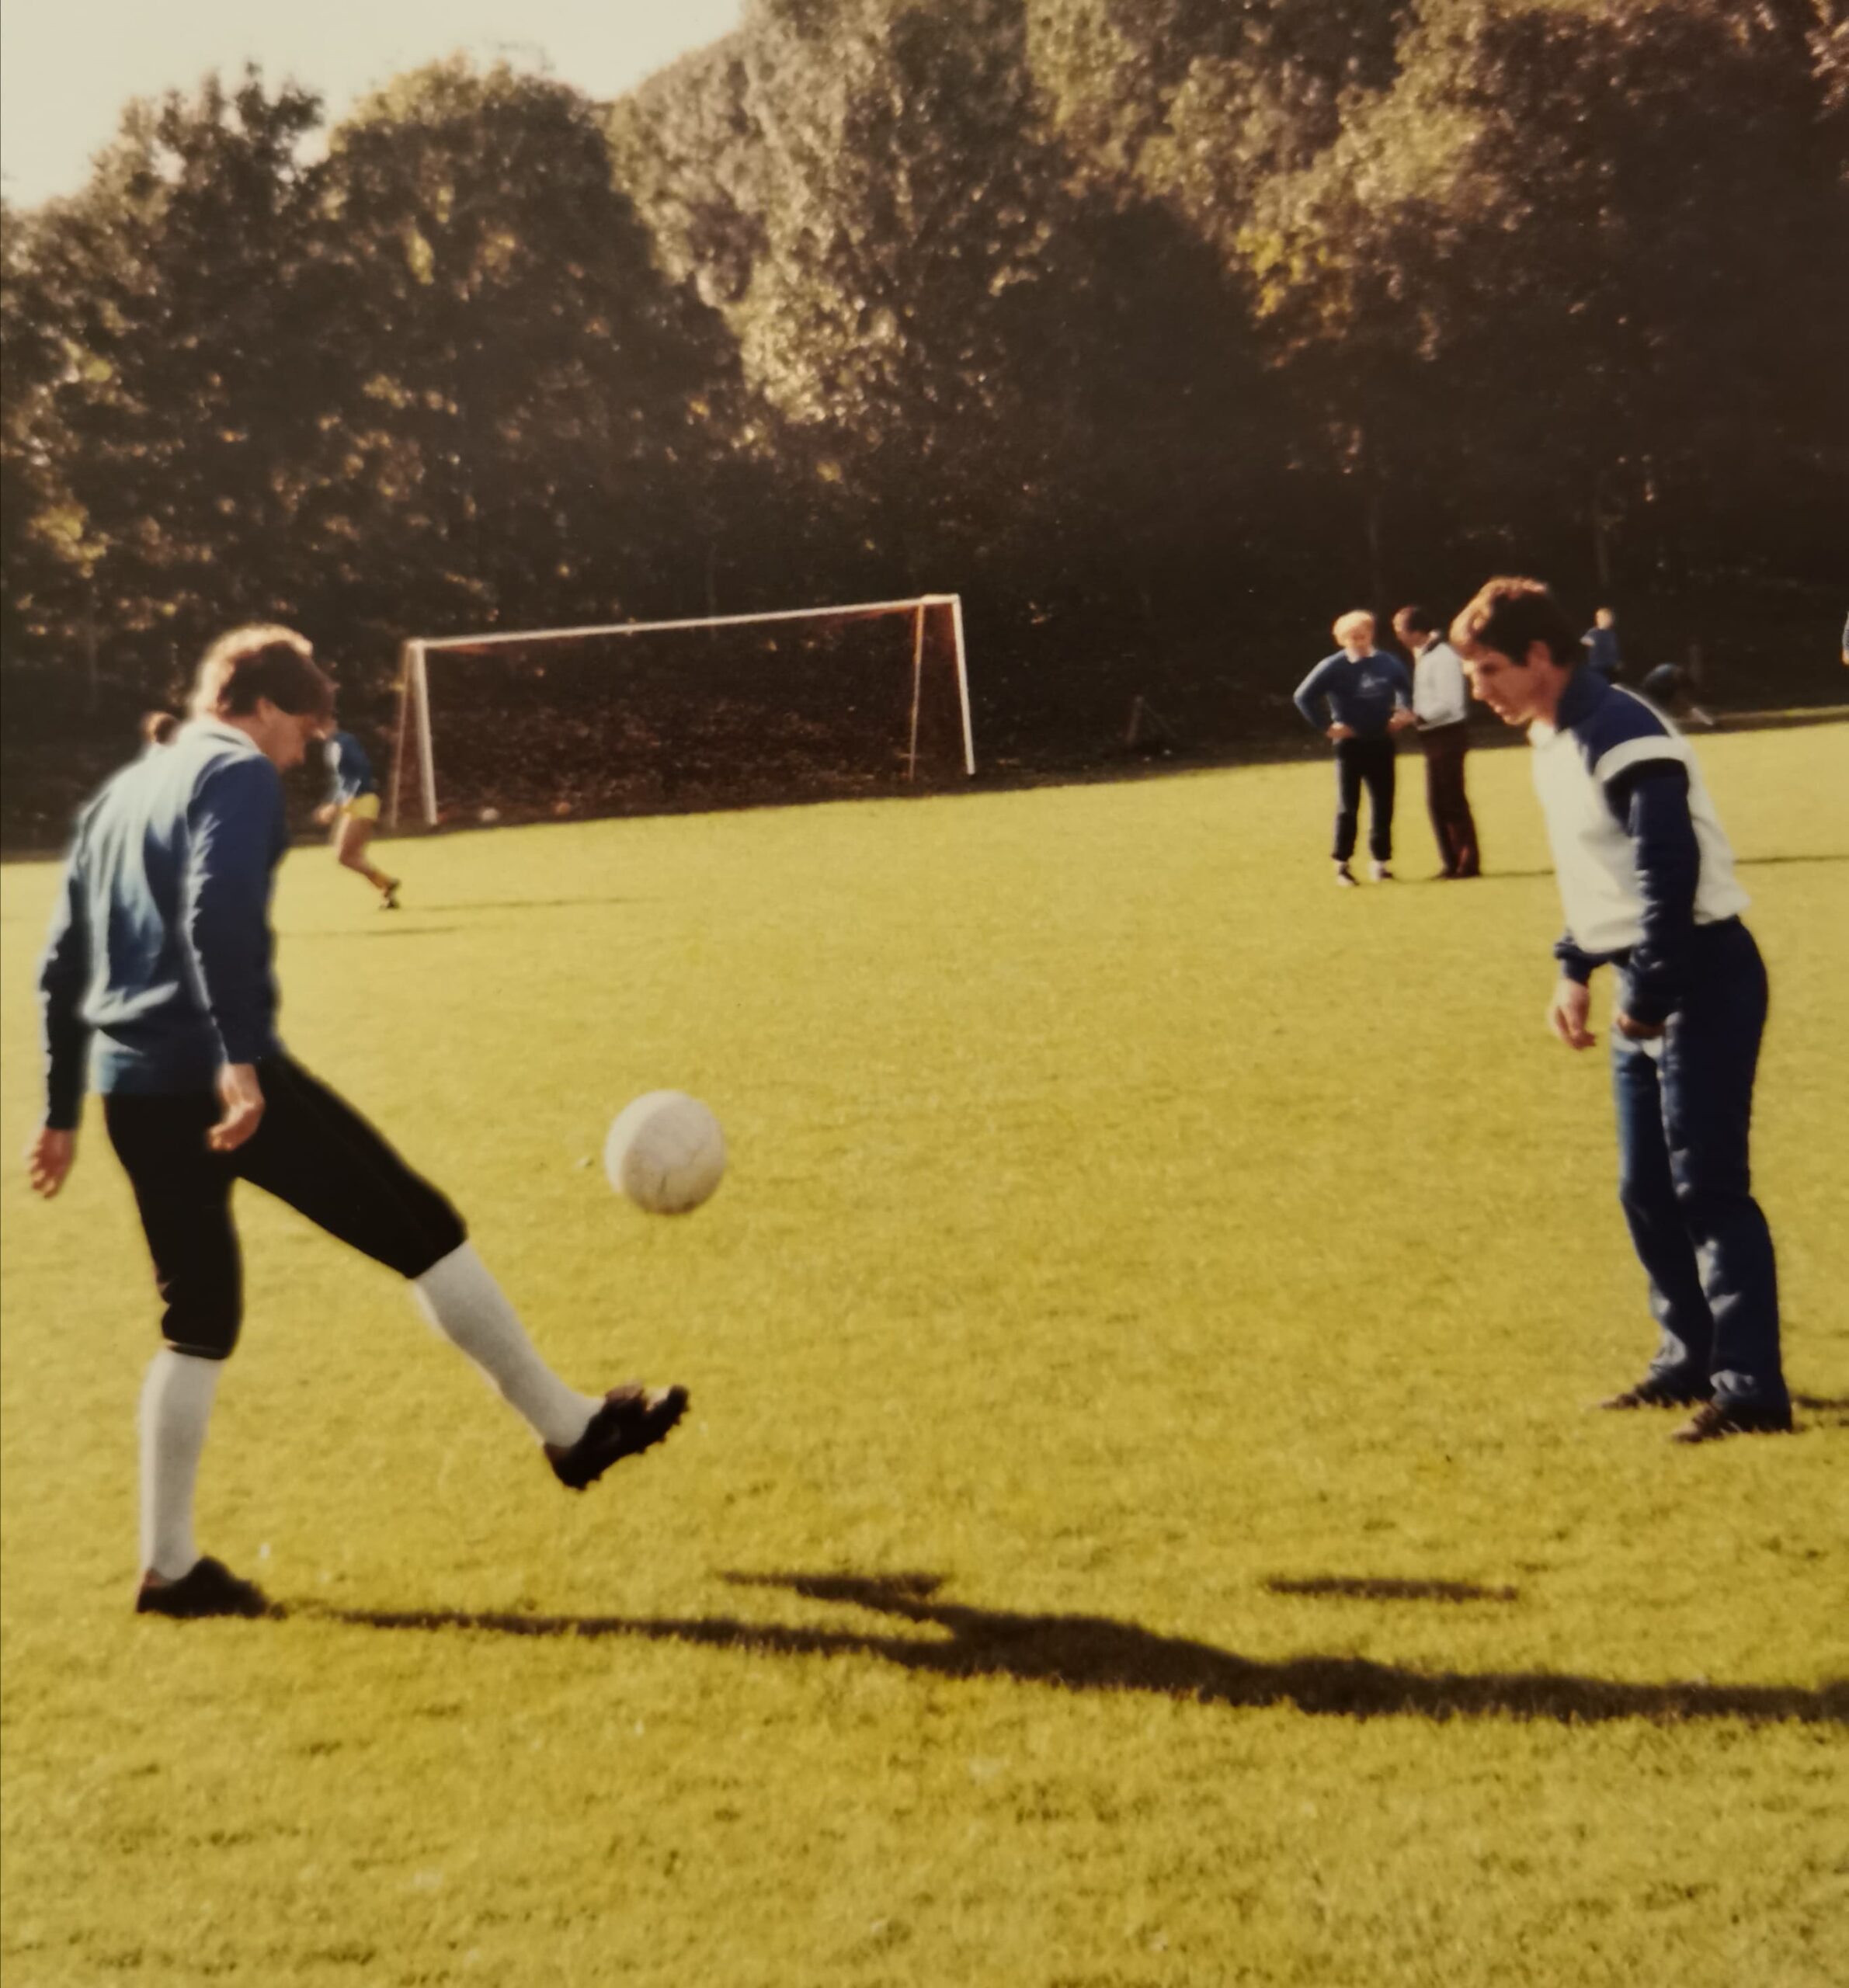 Adrian with Glenn Hoddle at Spurs, Cheshunt